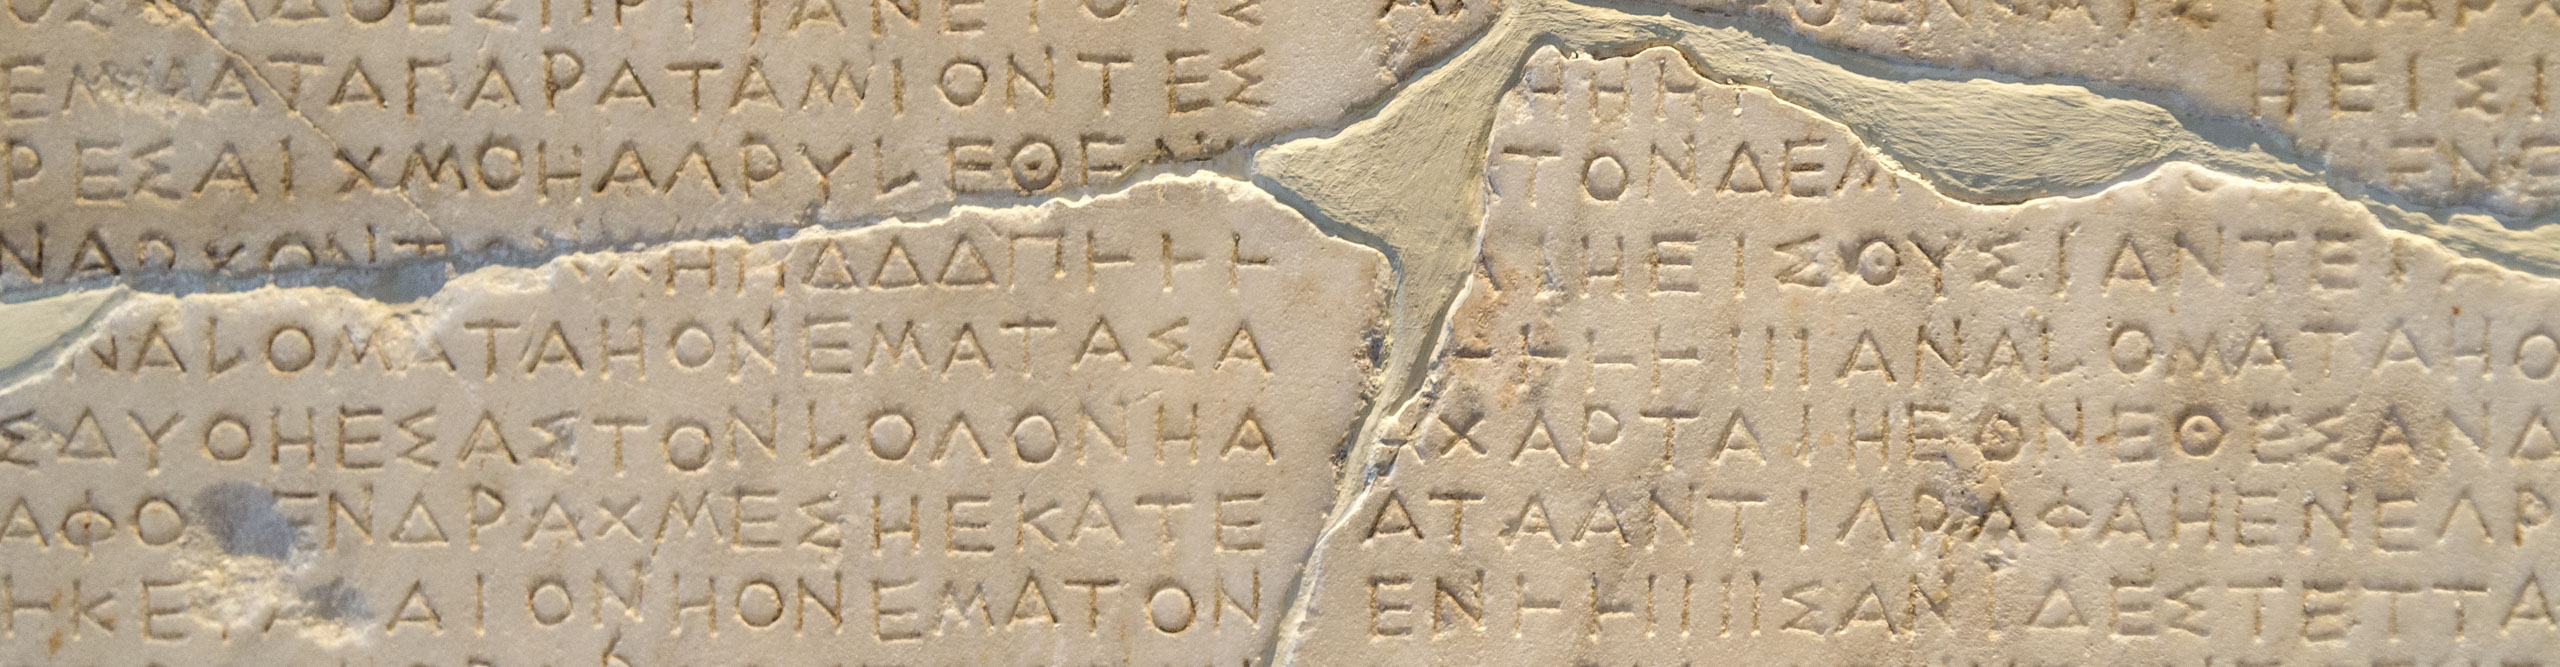 Ancient Greek writing carved into stone